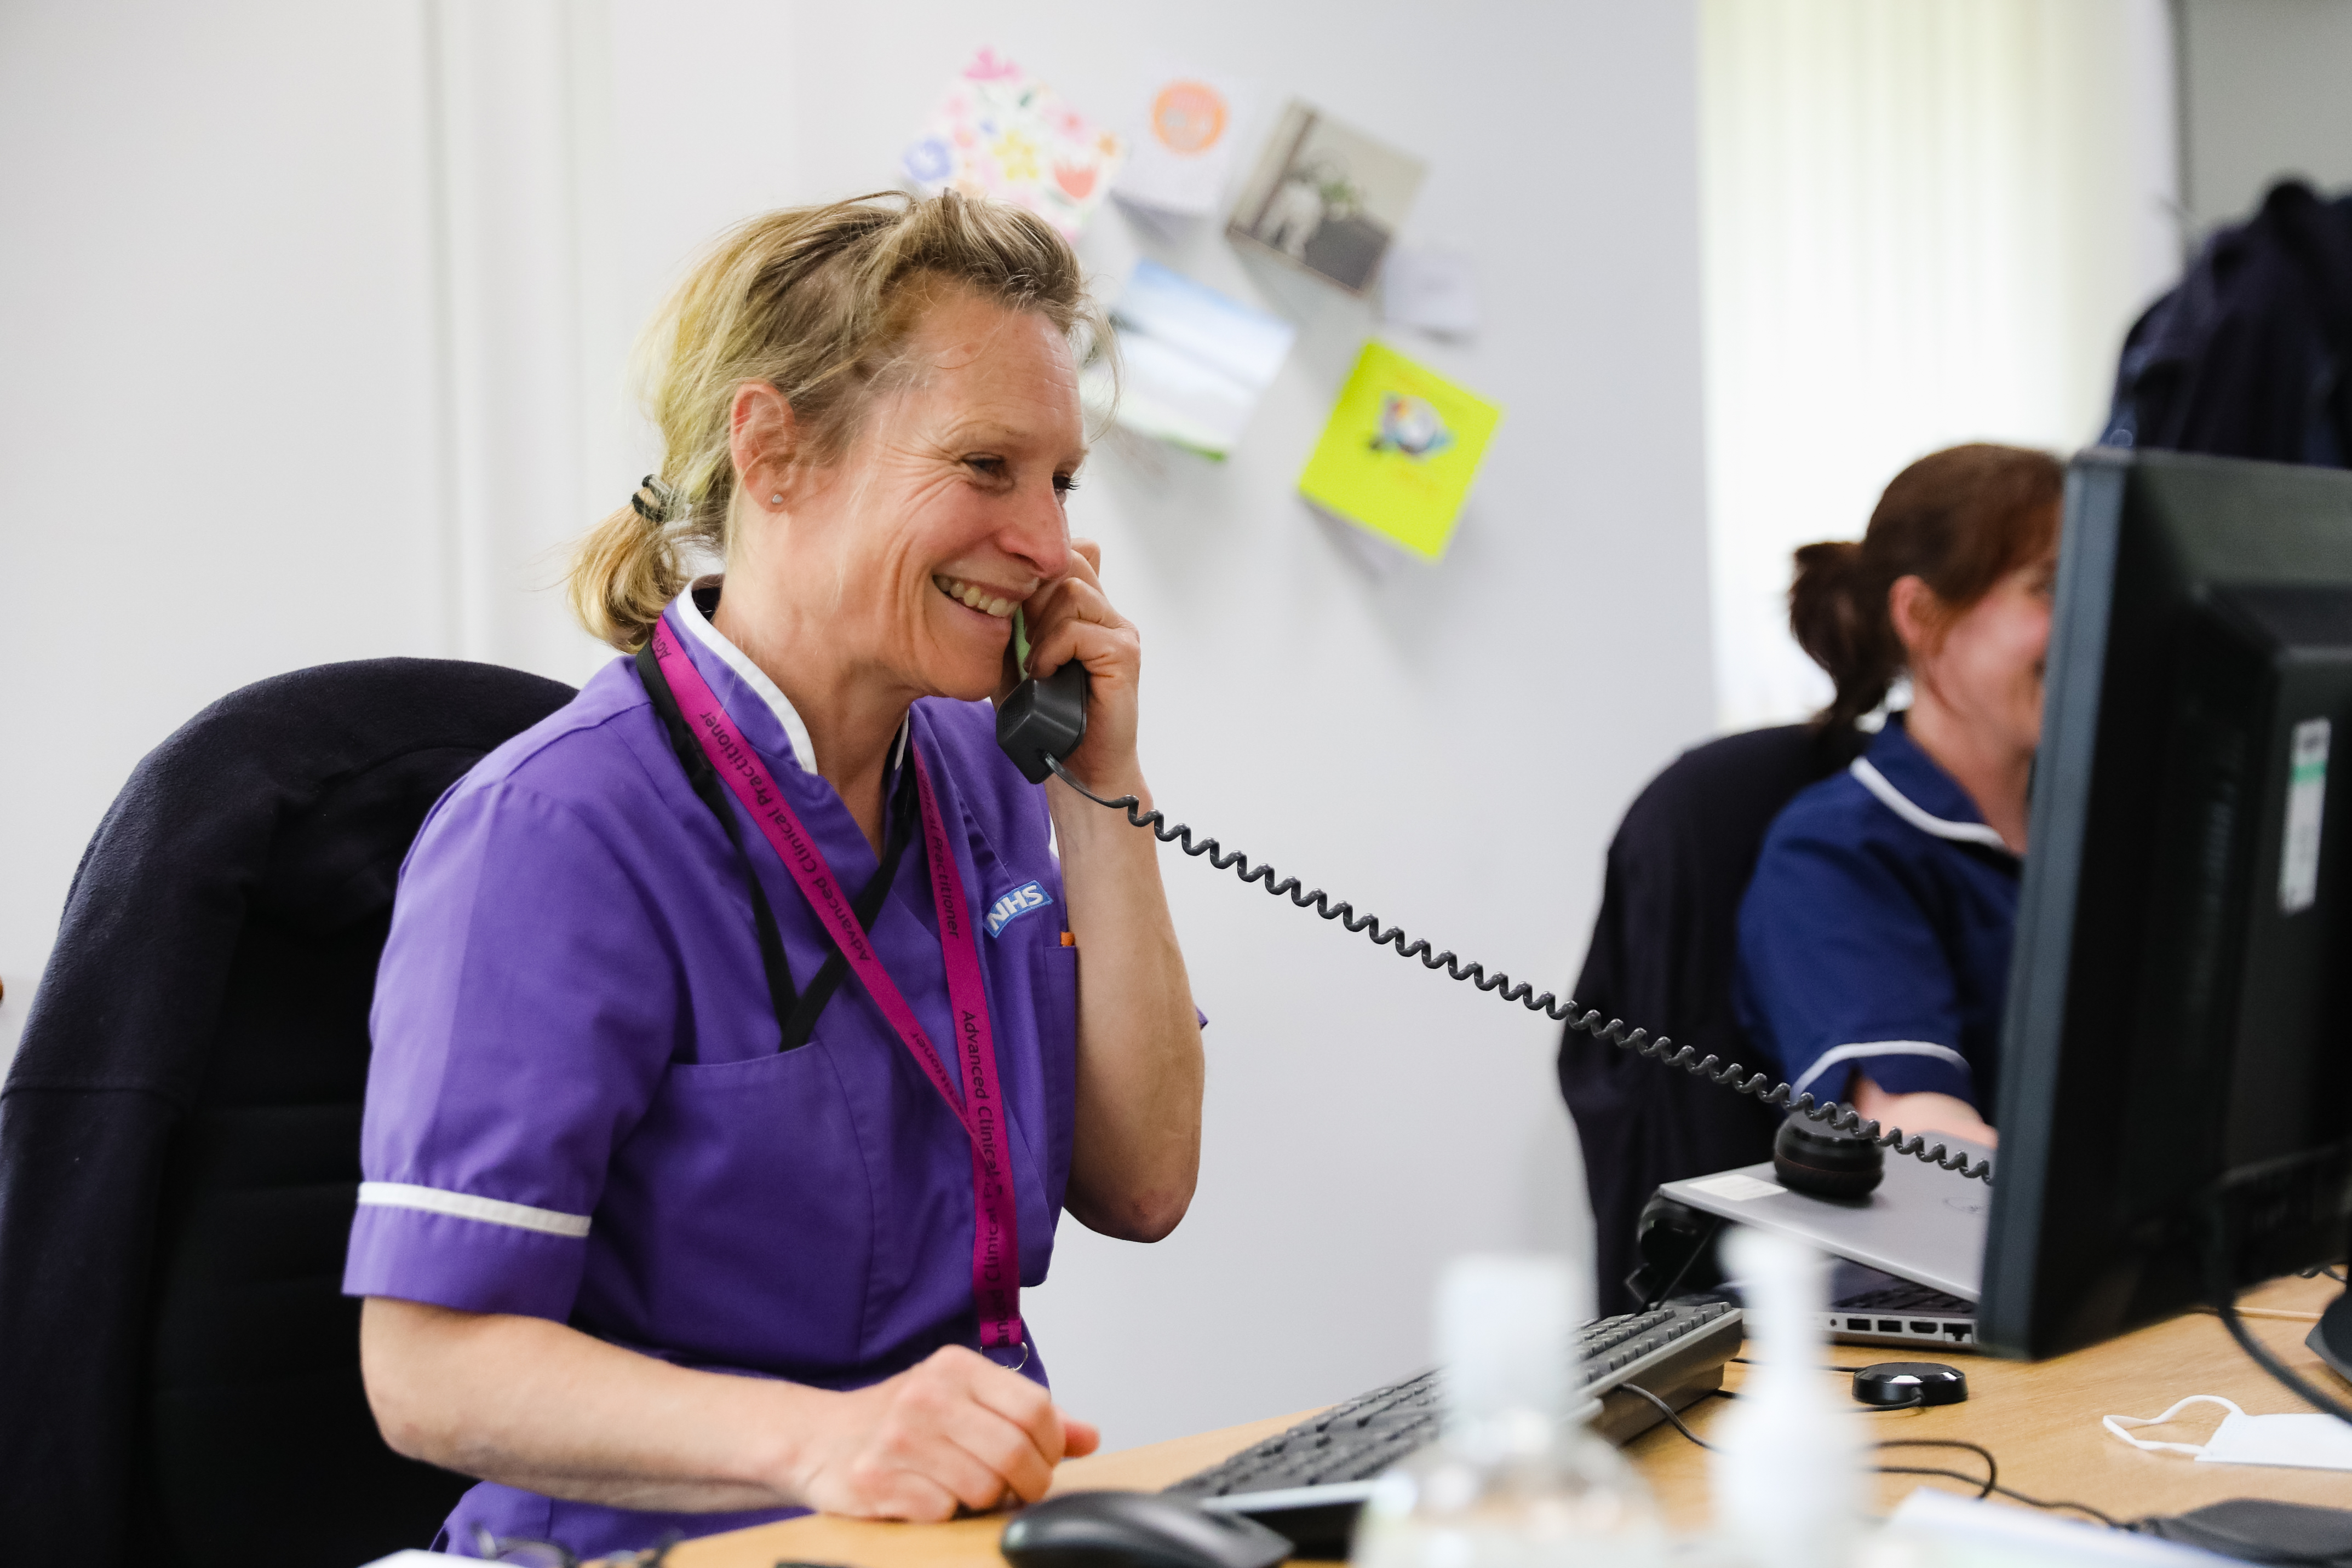 A Morecambe Bay NHS colleague in purple uniform sitting at a desk and smiling while on the phone